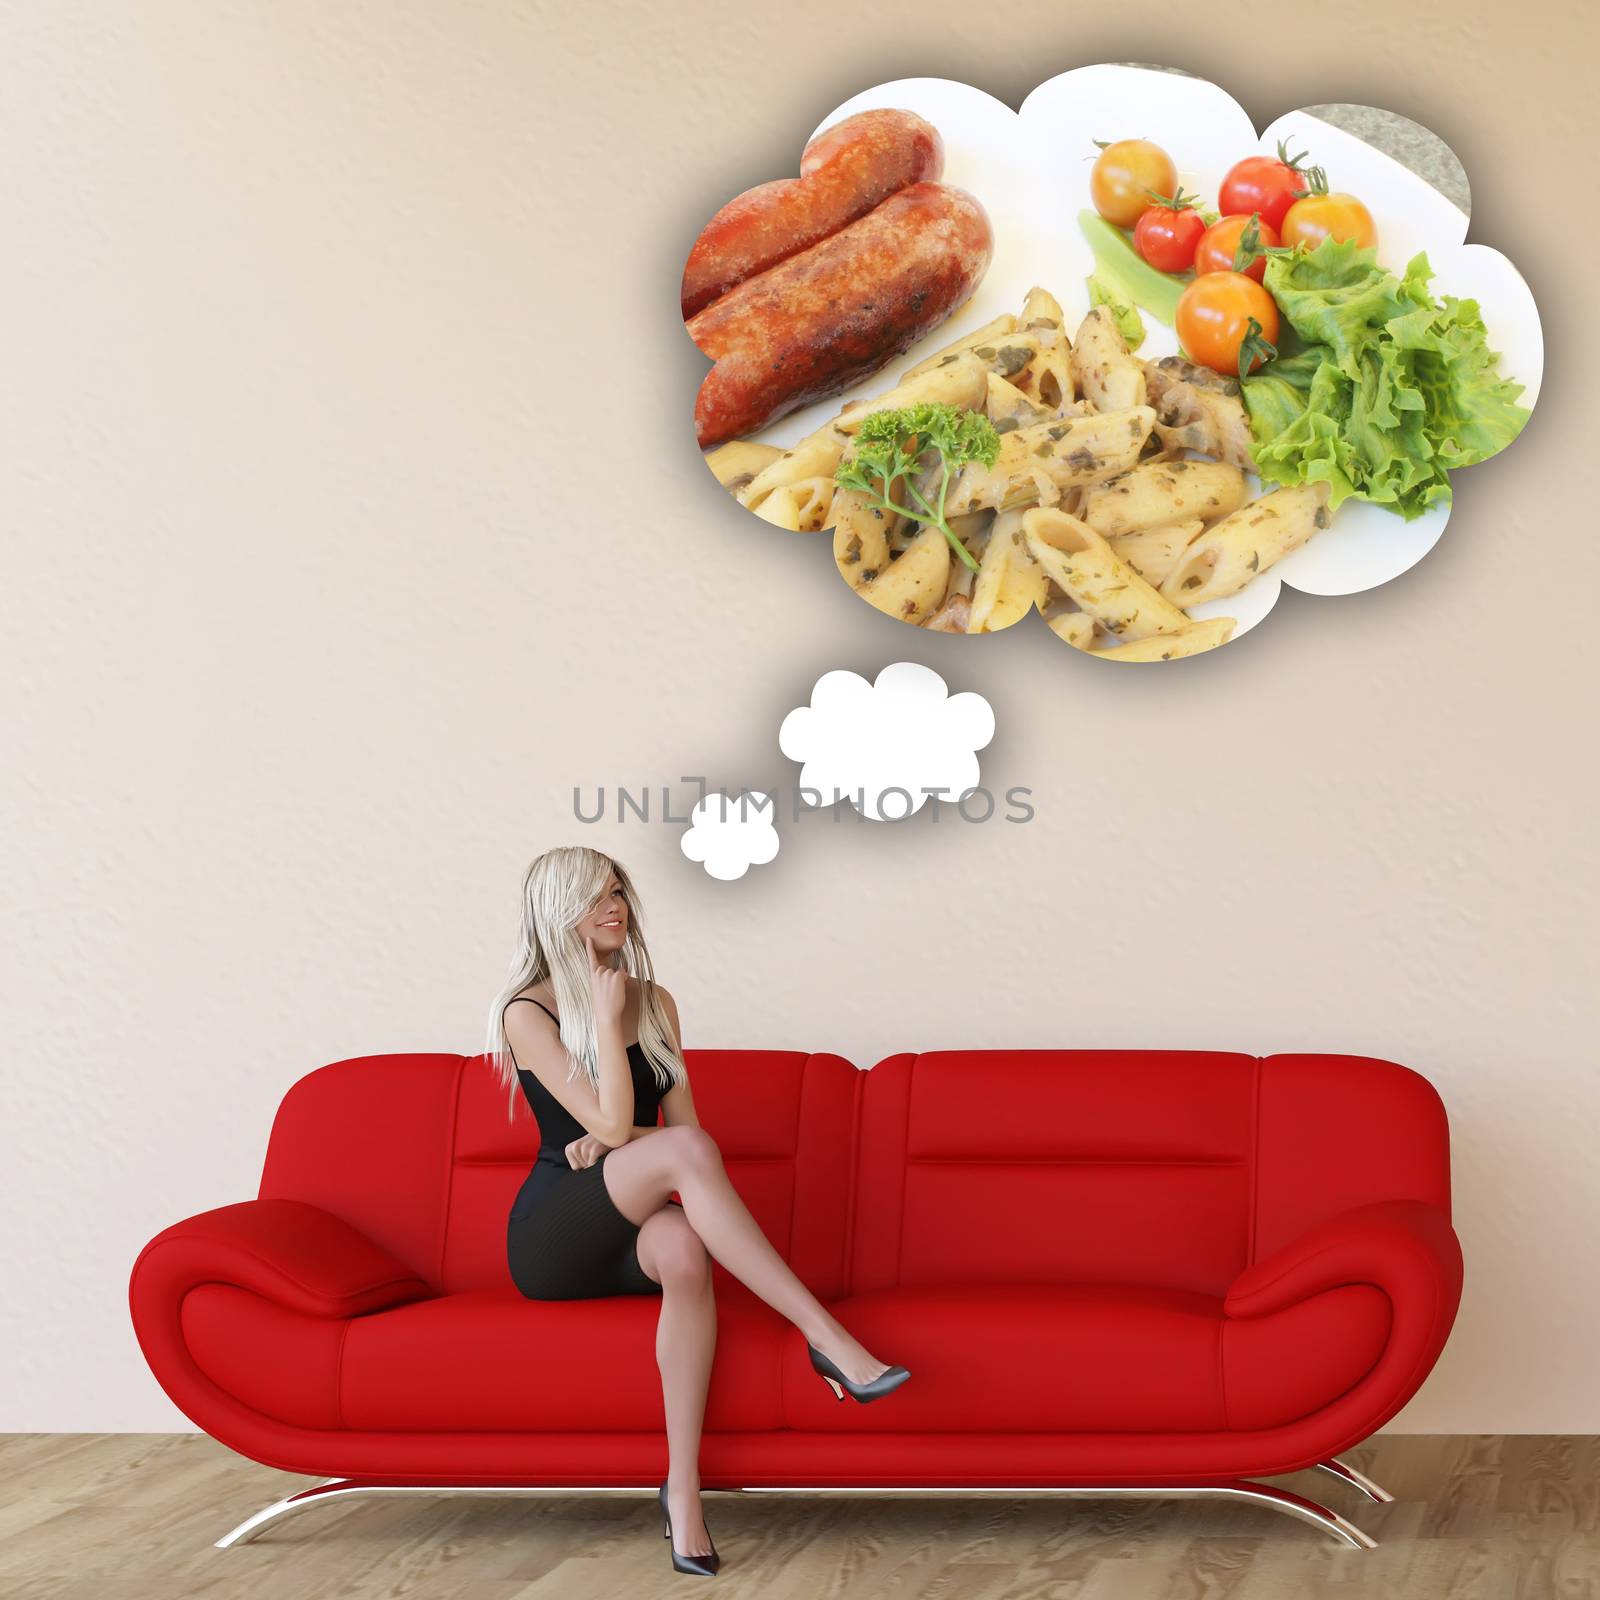 Woman Craving Italian Food and Thinking About Eating Food